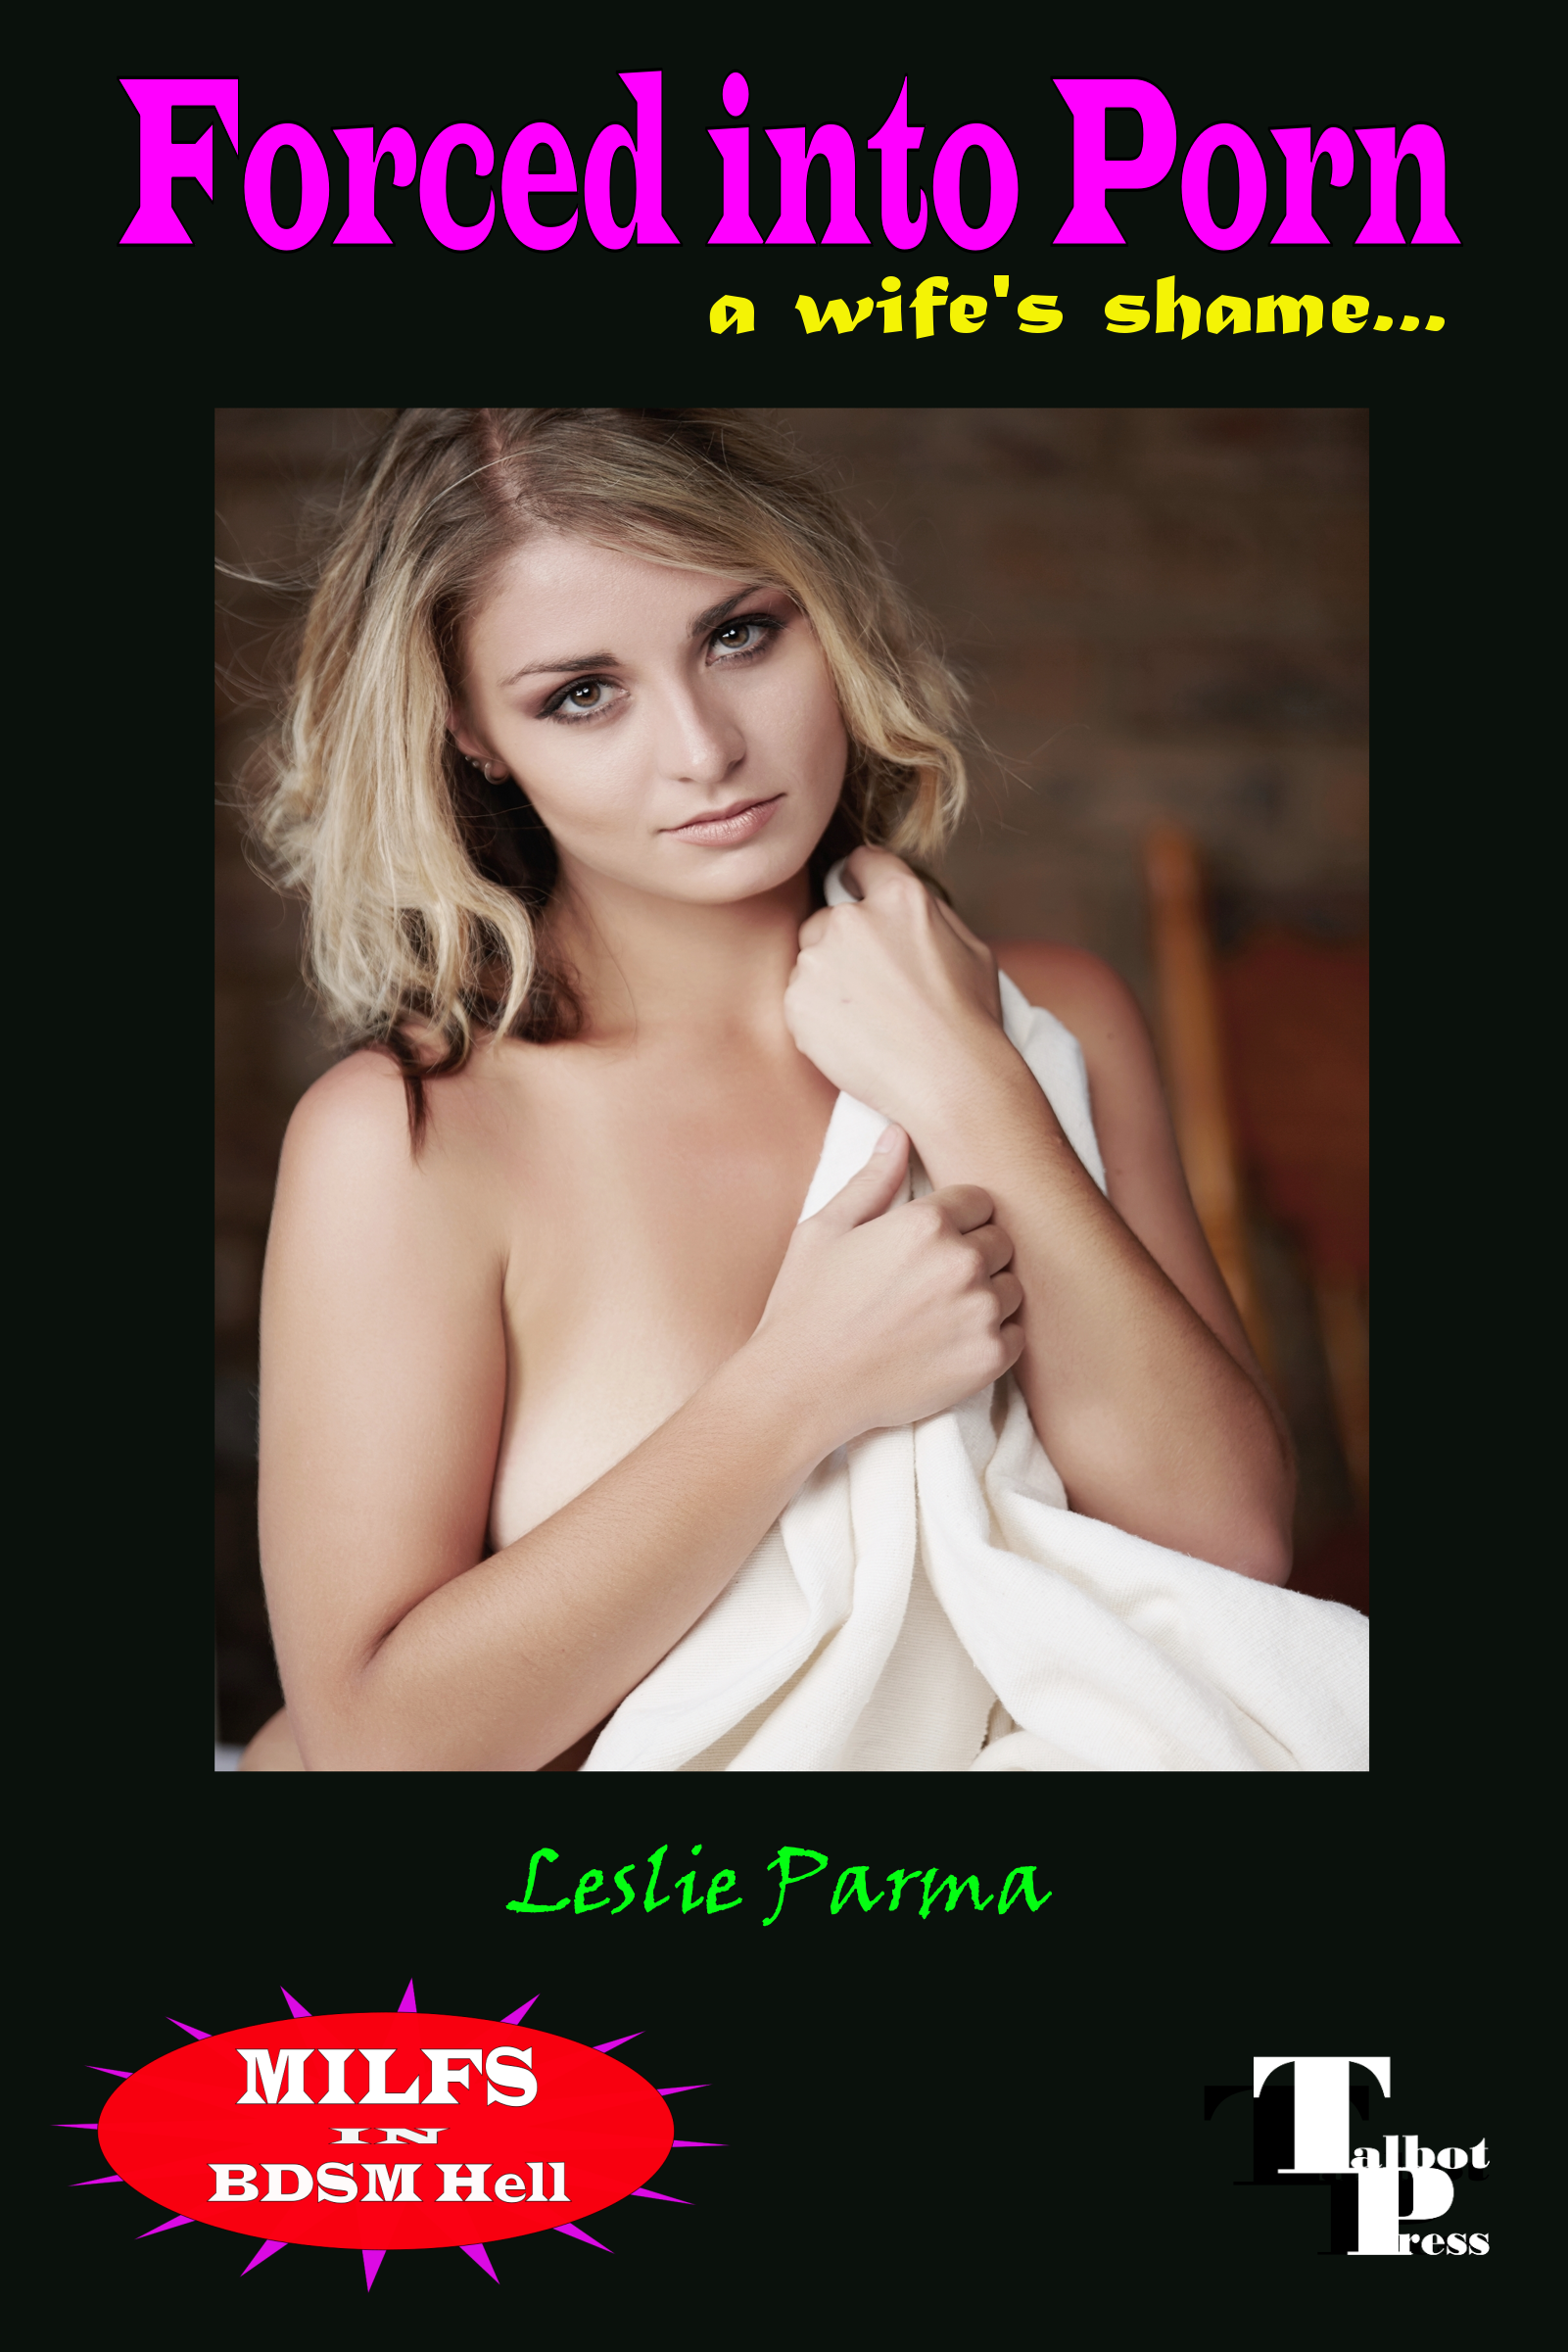 Forced into Porn, an Ebook by Leslie Parma